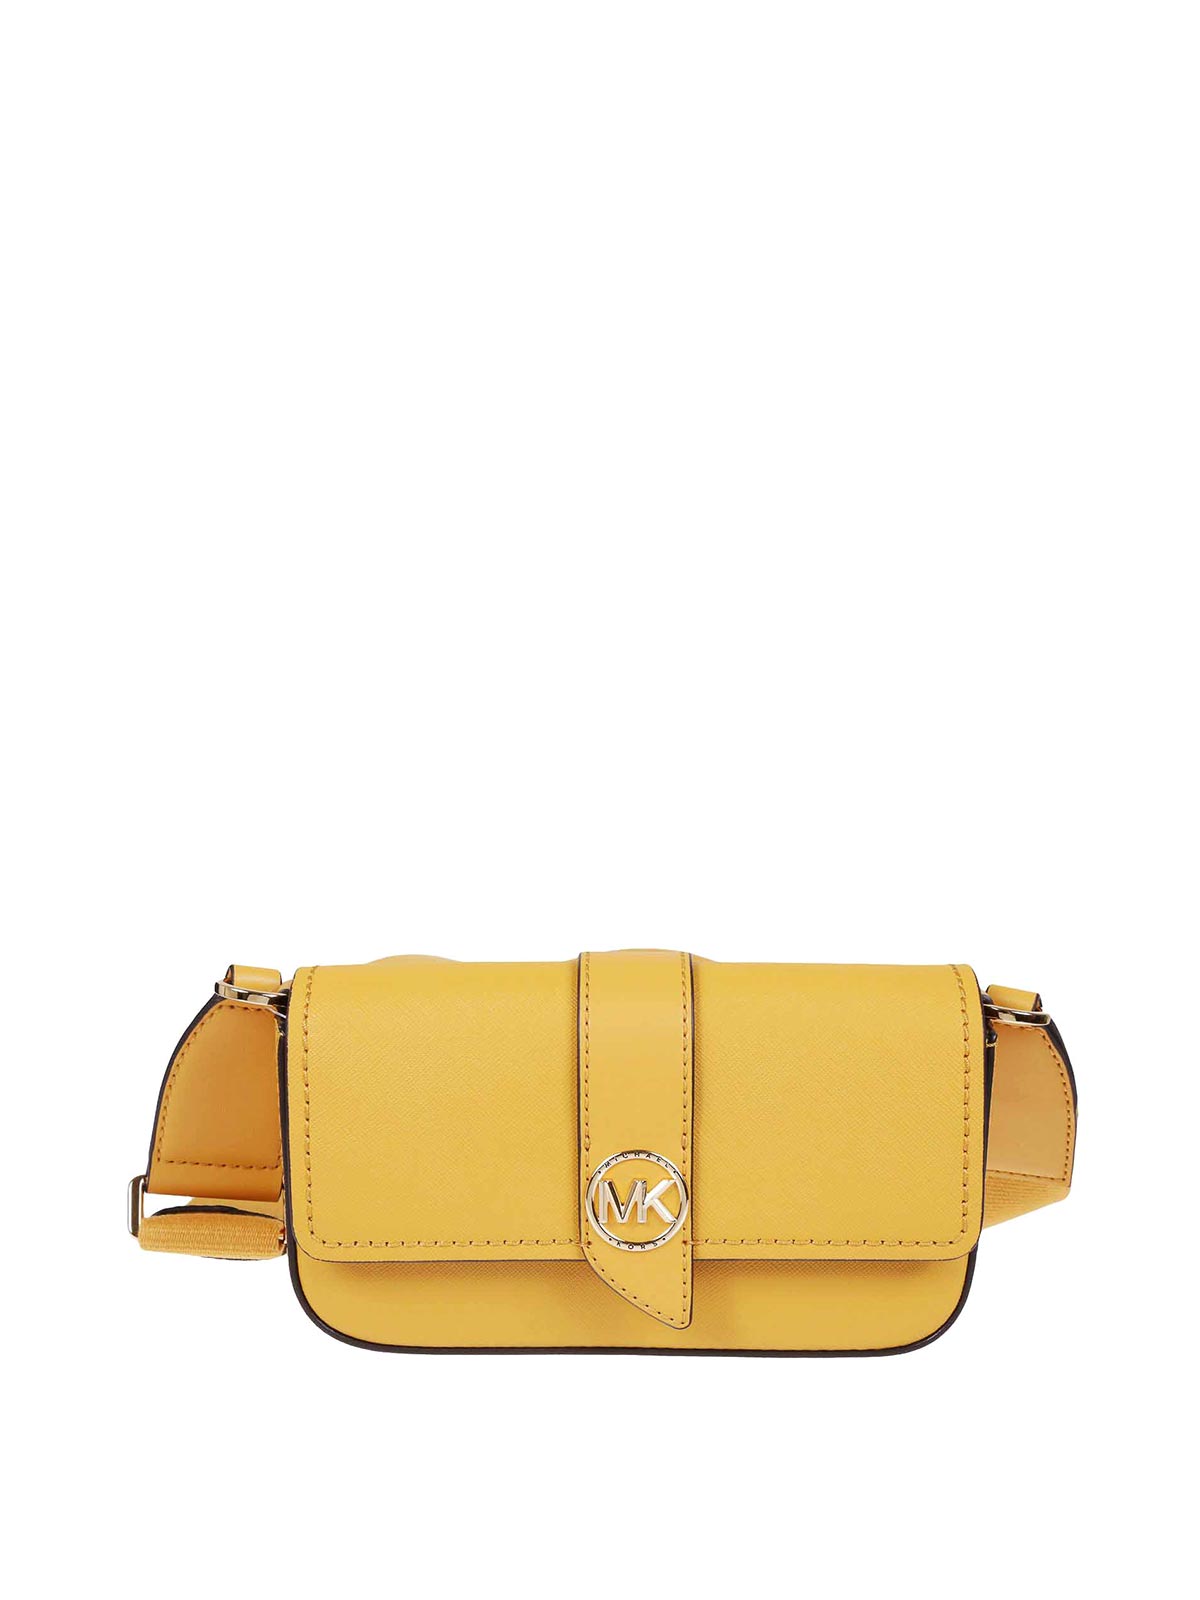 Michael Kors Saffiano Leather Bag In Yellow